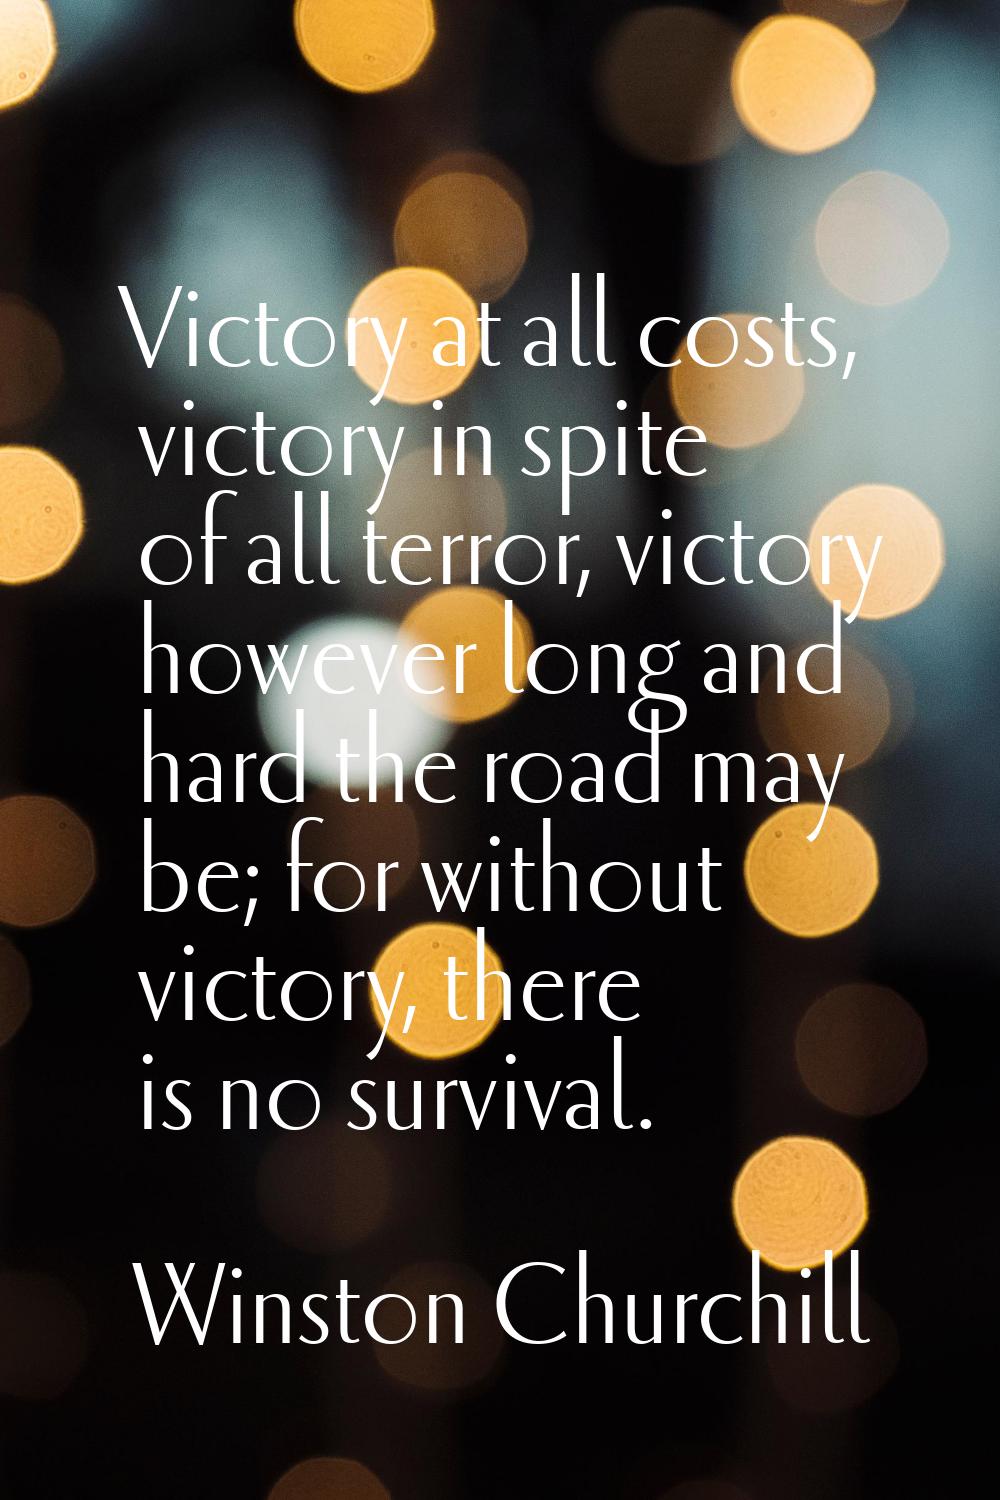 Victory at all costs, victory in spite of all terror, victory however long and hard the road may be